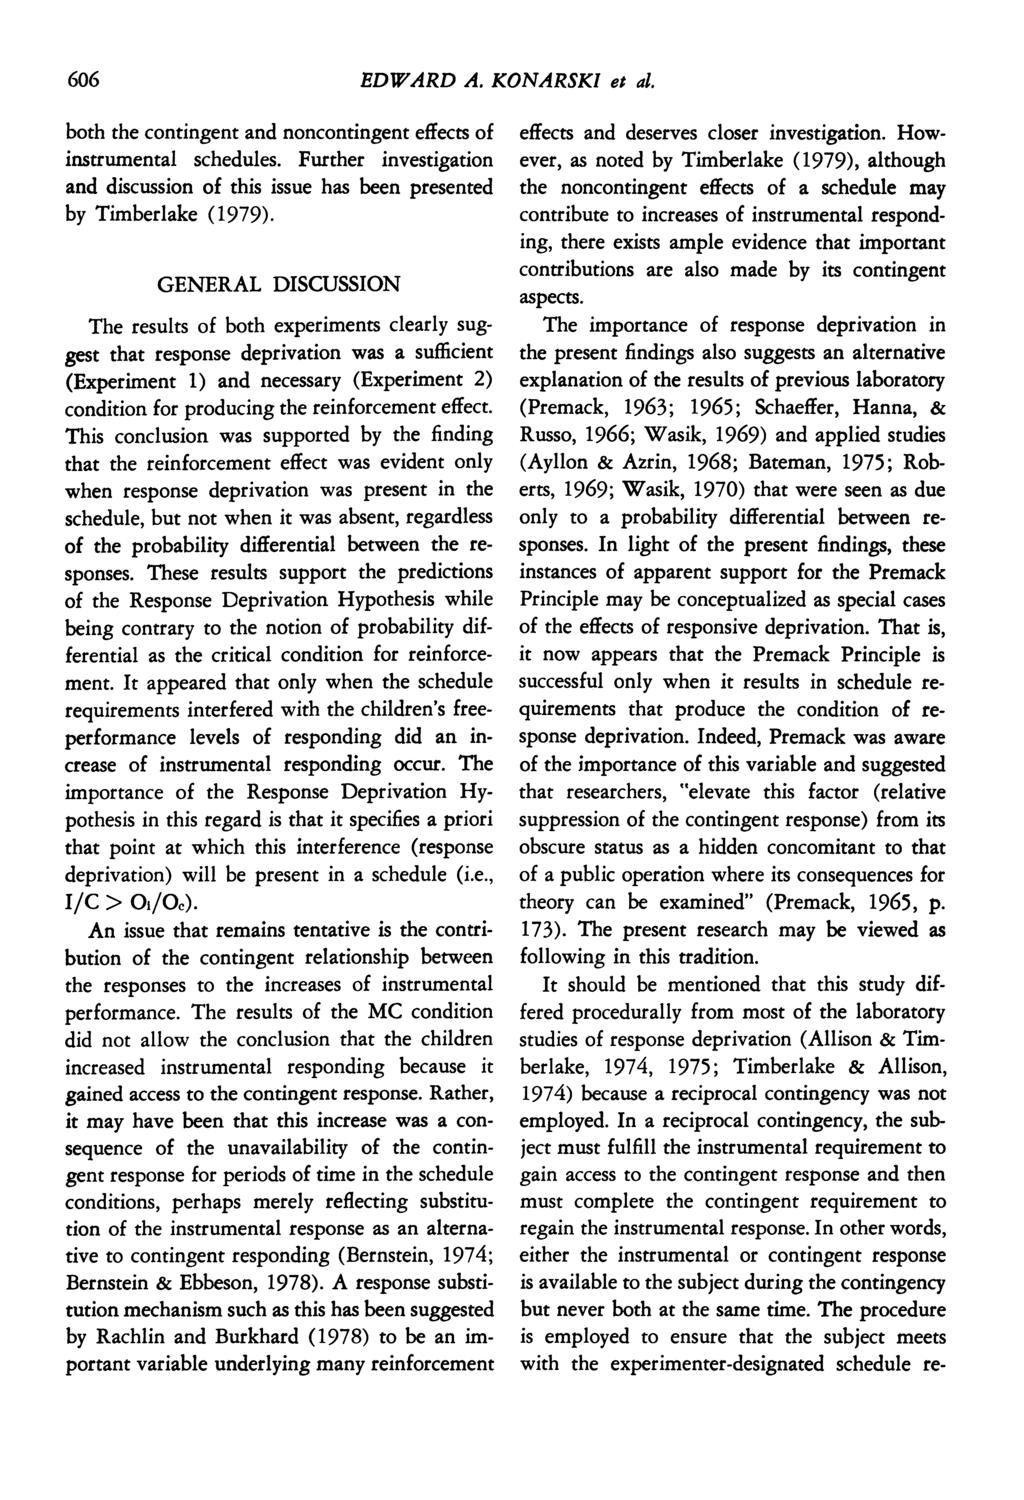 606 60EDWARD A. KONARSKI et l. both the contingent nd noncontingent effects of instrumentl schedules. Further investigtion nd discussion of this issue hs been presented by Timberlke (1979).